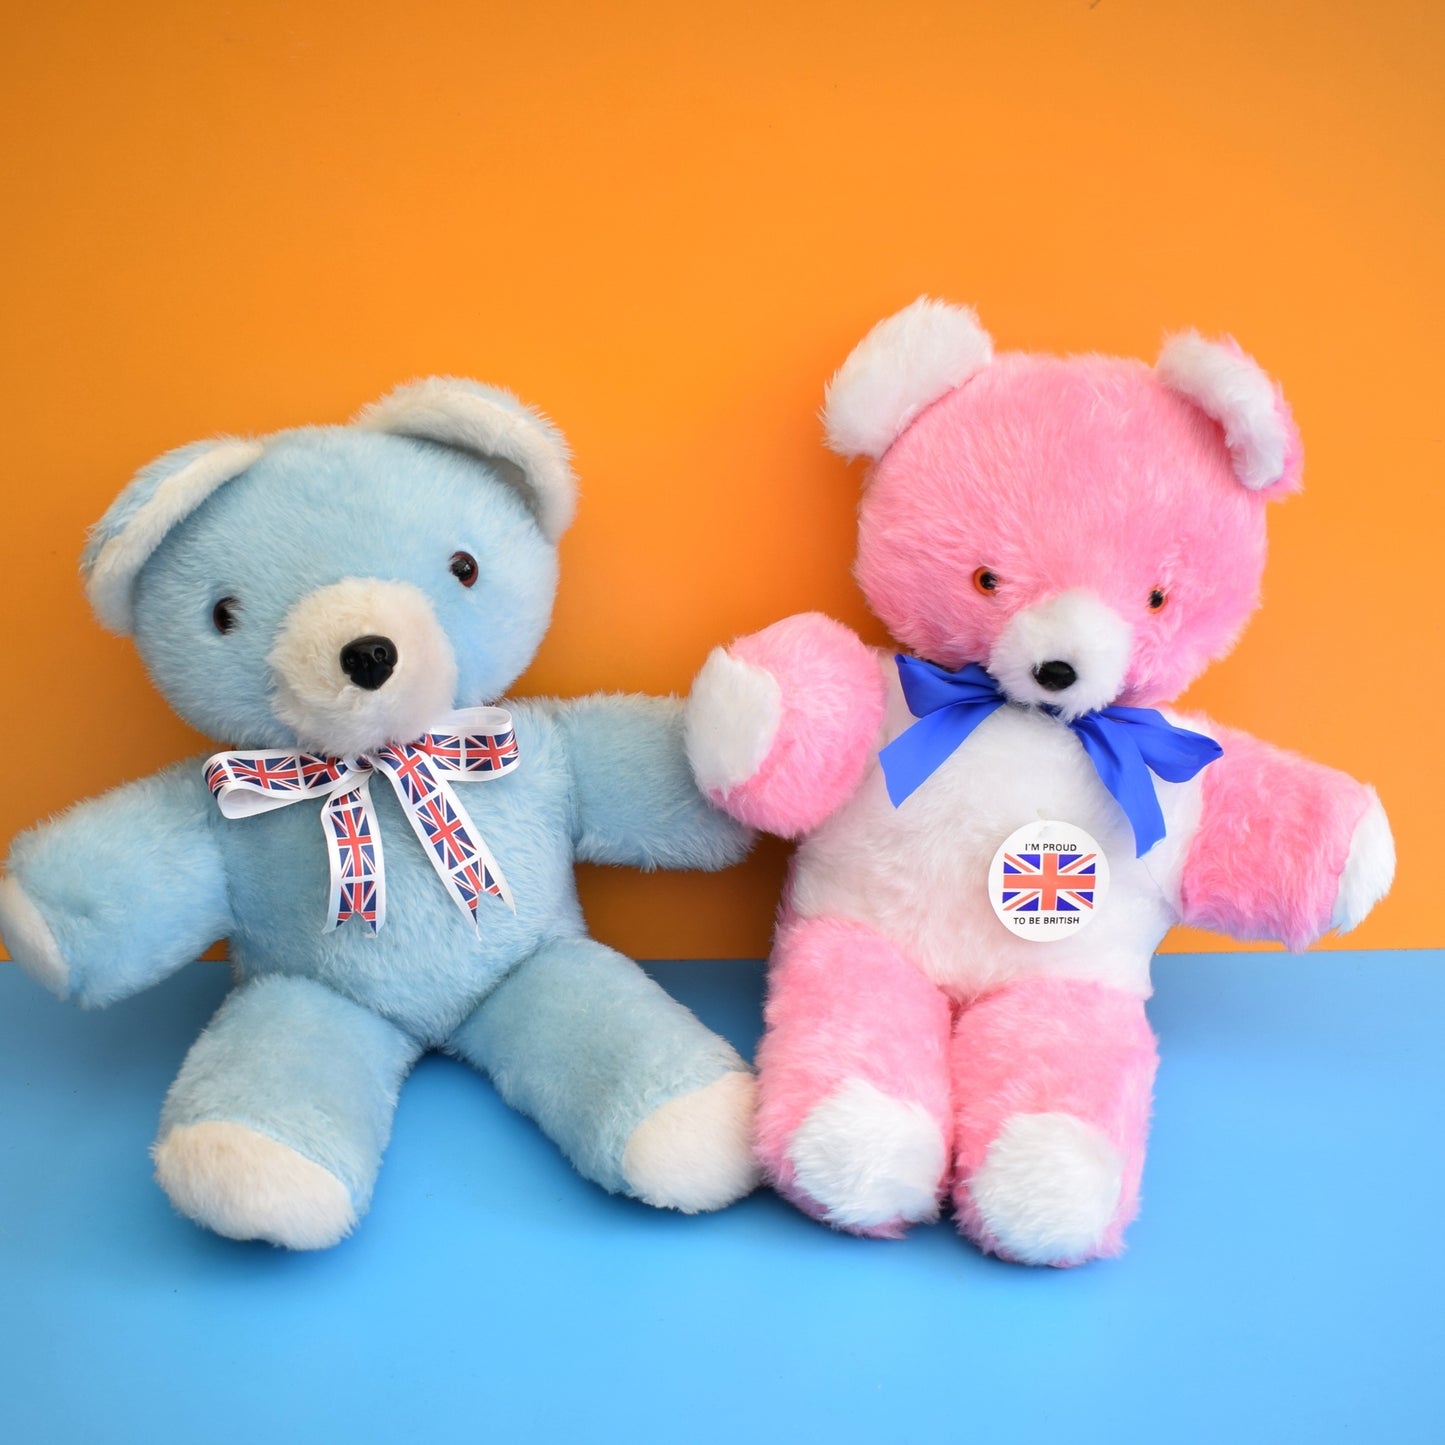 Vintage 1960s Teddy Bears - Made in England - Pink / Blue